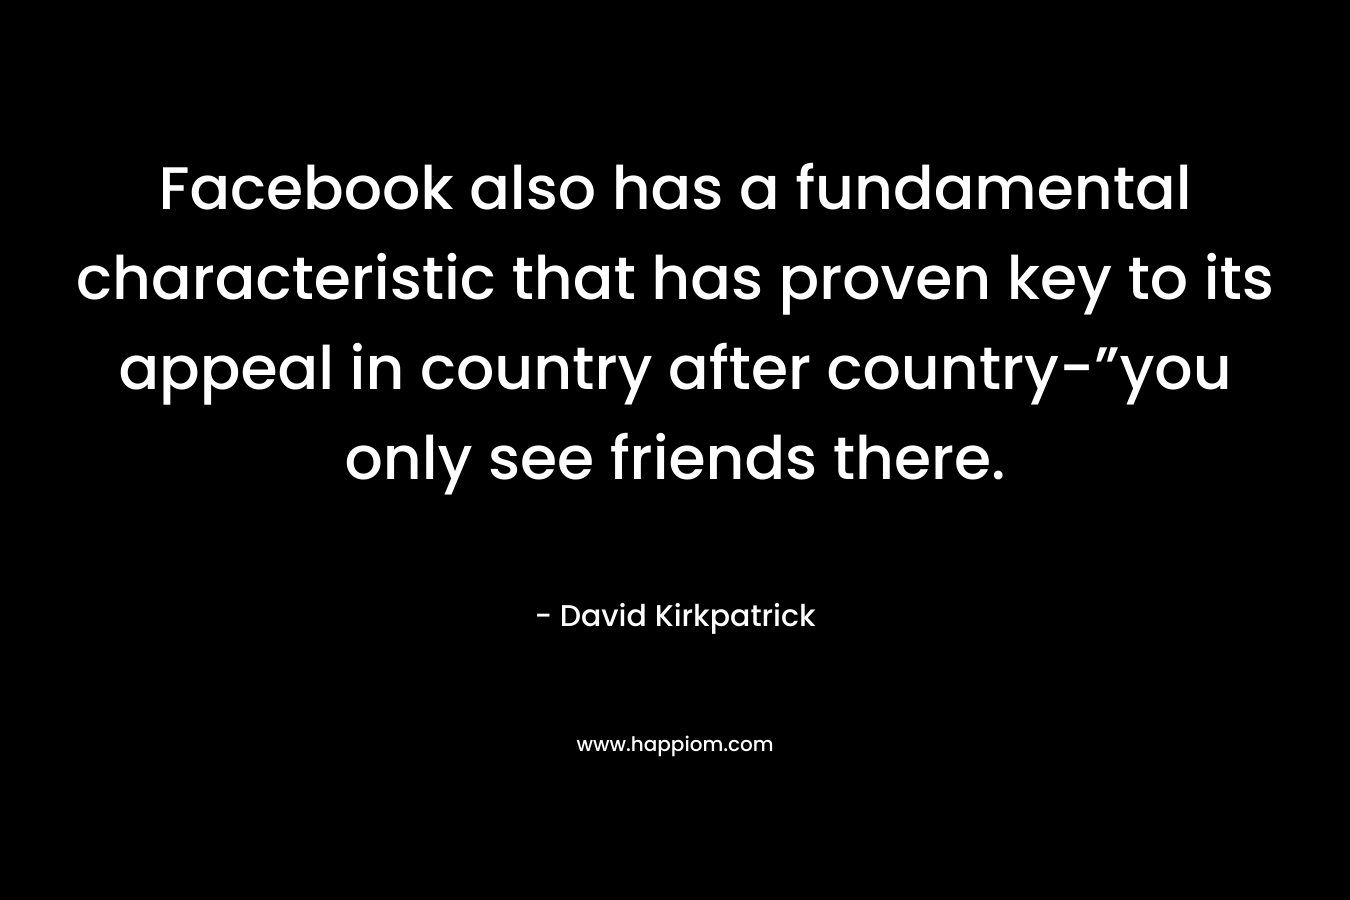 Facebook also has a fundamental characteristic that has proven key to its appeal in country after country-”you only see friends there.